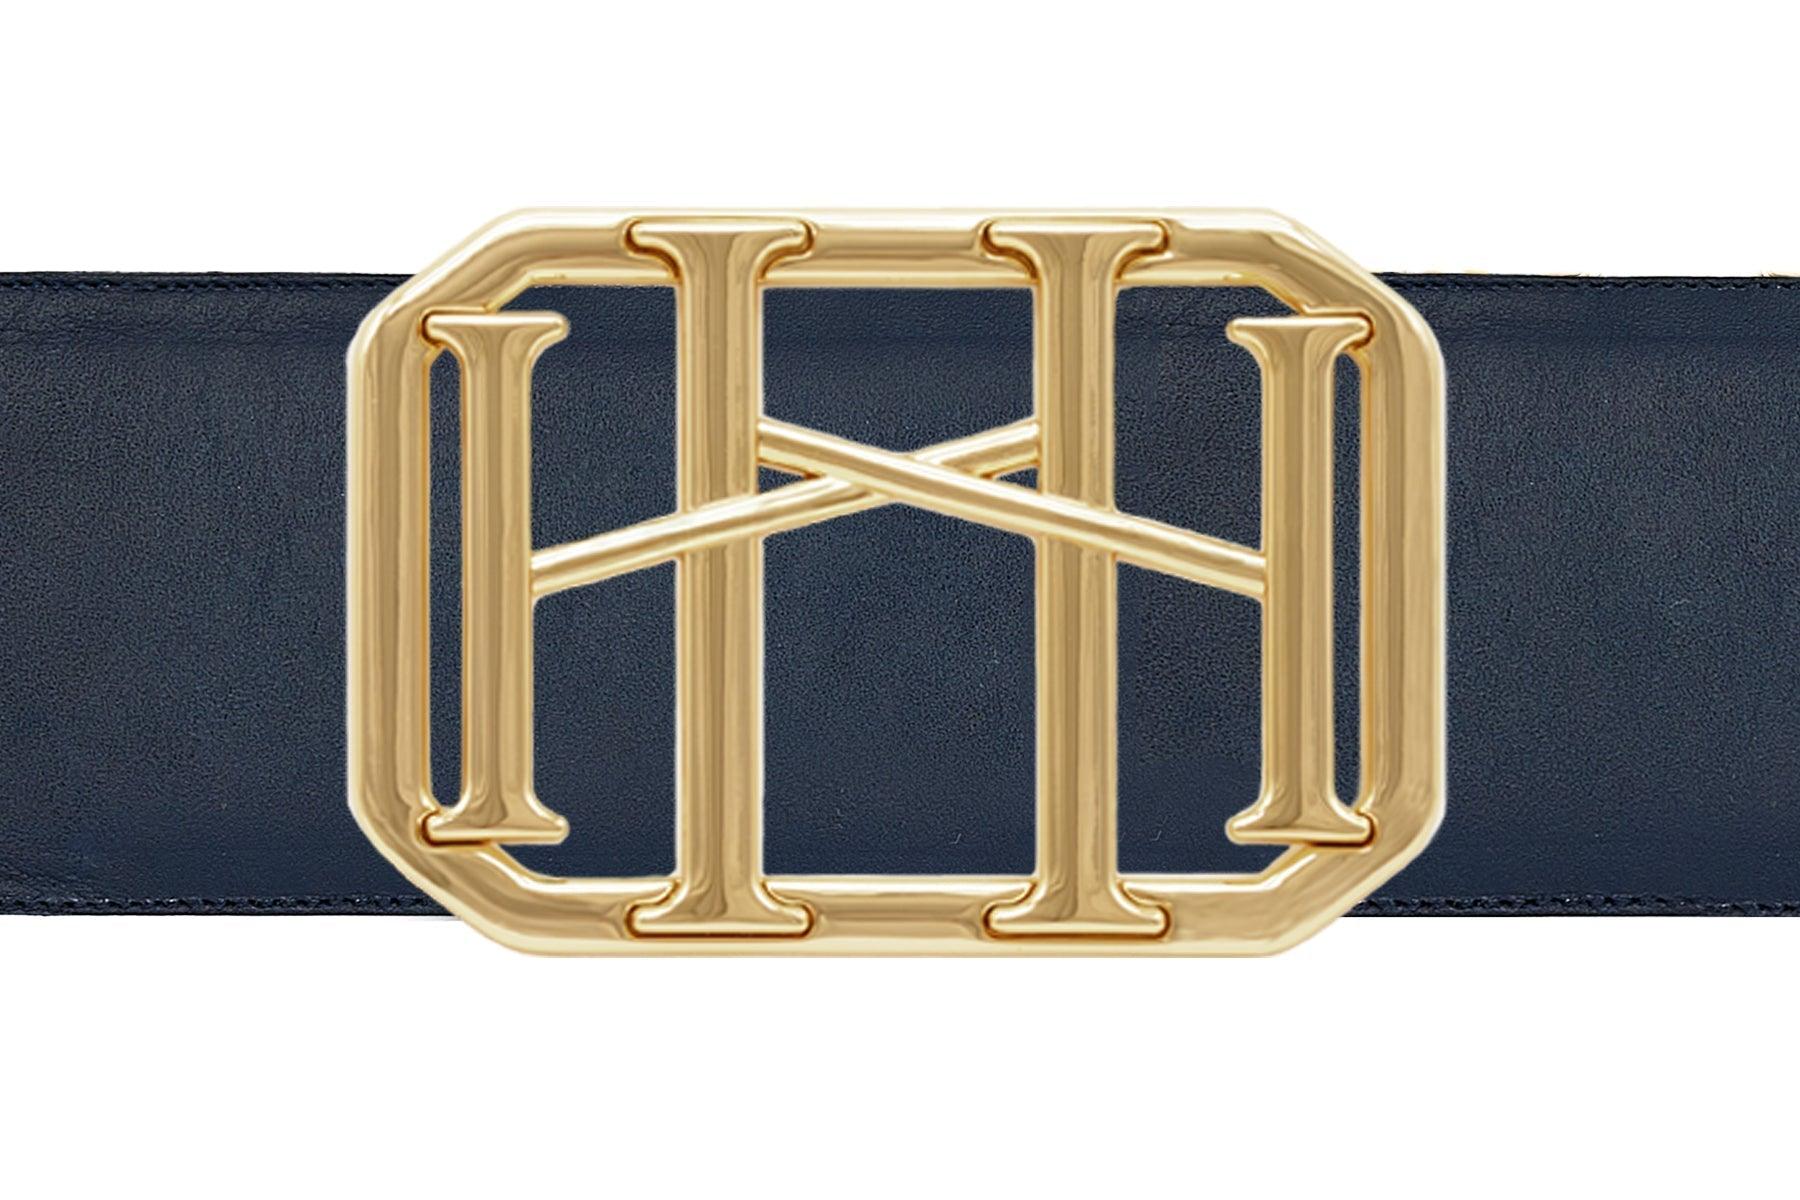 Icon Equestrian Belt - Navy Leather with Hunter Green, Navy and Magenta Stripe - RM - The In Gate